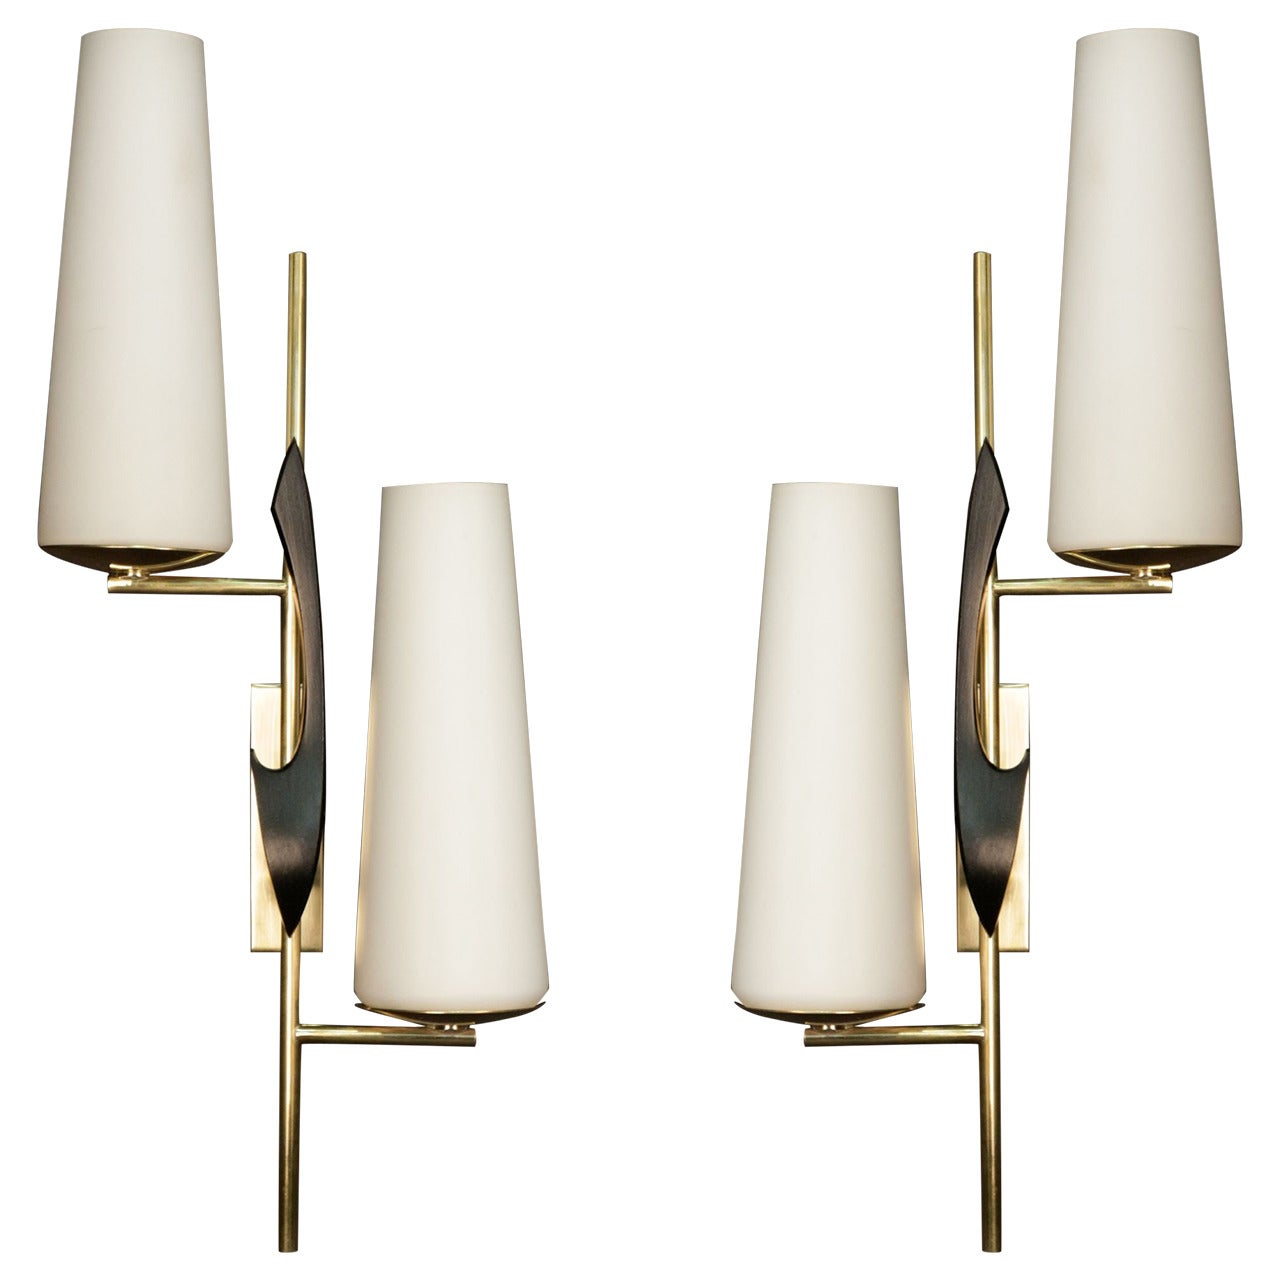 Pair of 1950s Asymmetrical Sconces by Maison Arlus